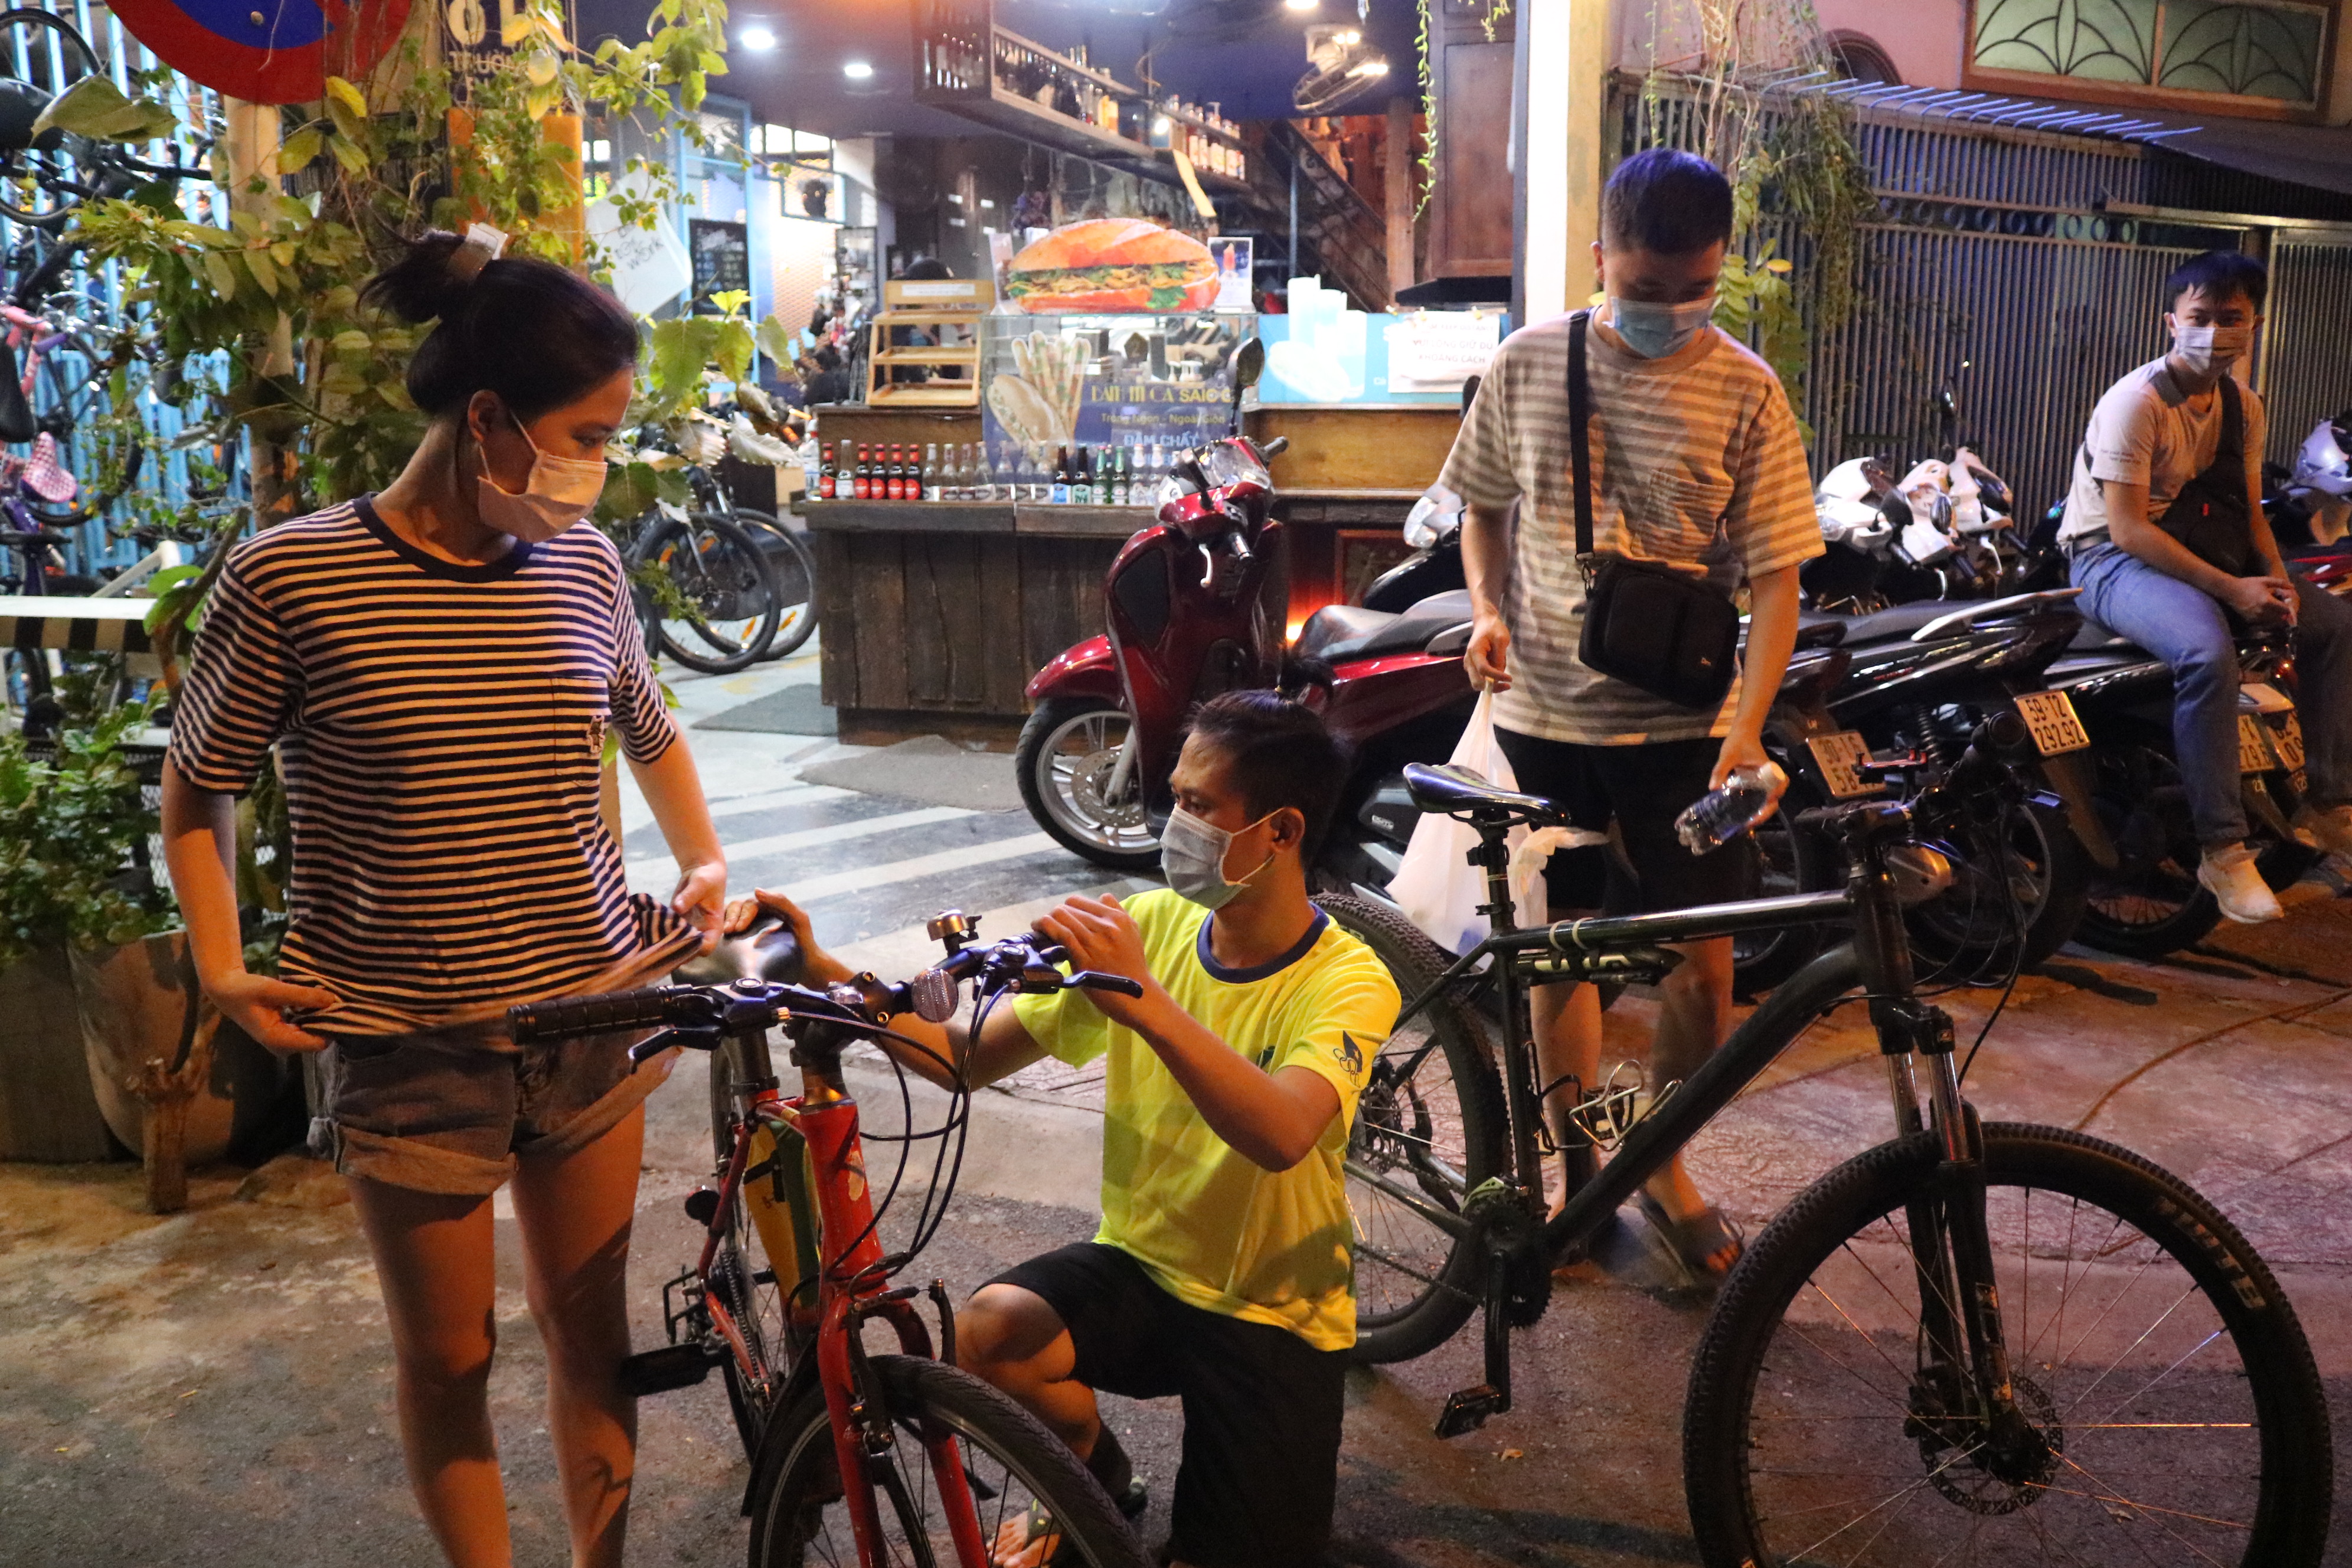 Min (center), a staff member at The Bike Coffee, adjusts a bike seat for a customer at The Bike Coffee in District 3 in Ho Chi Minh City on November 3, 20201. Photo: Hoang An / Tuoi Tre News